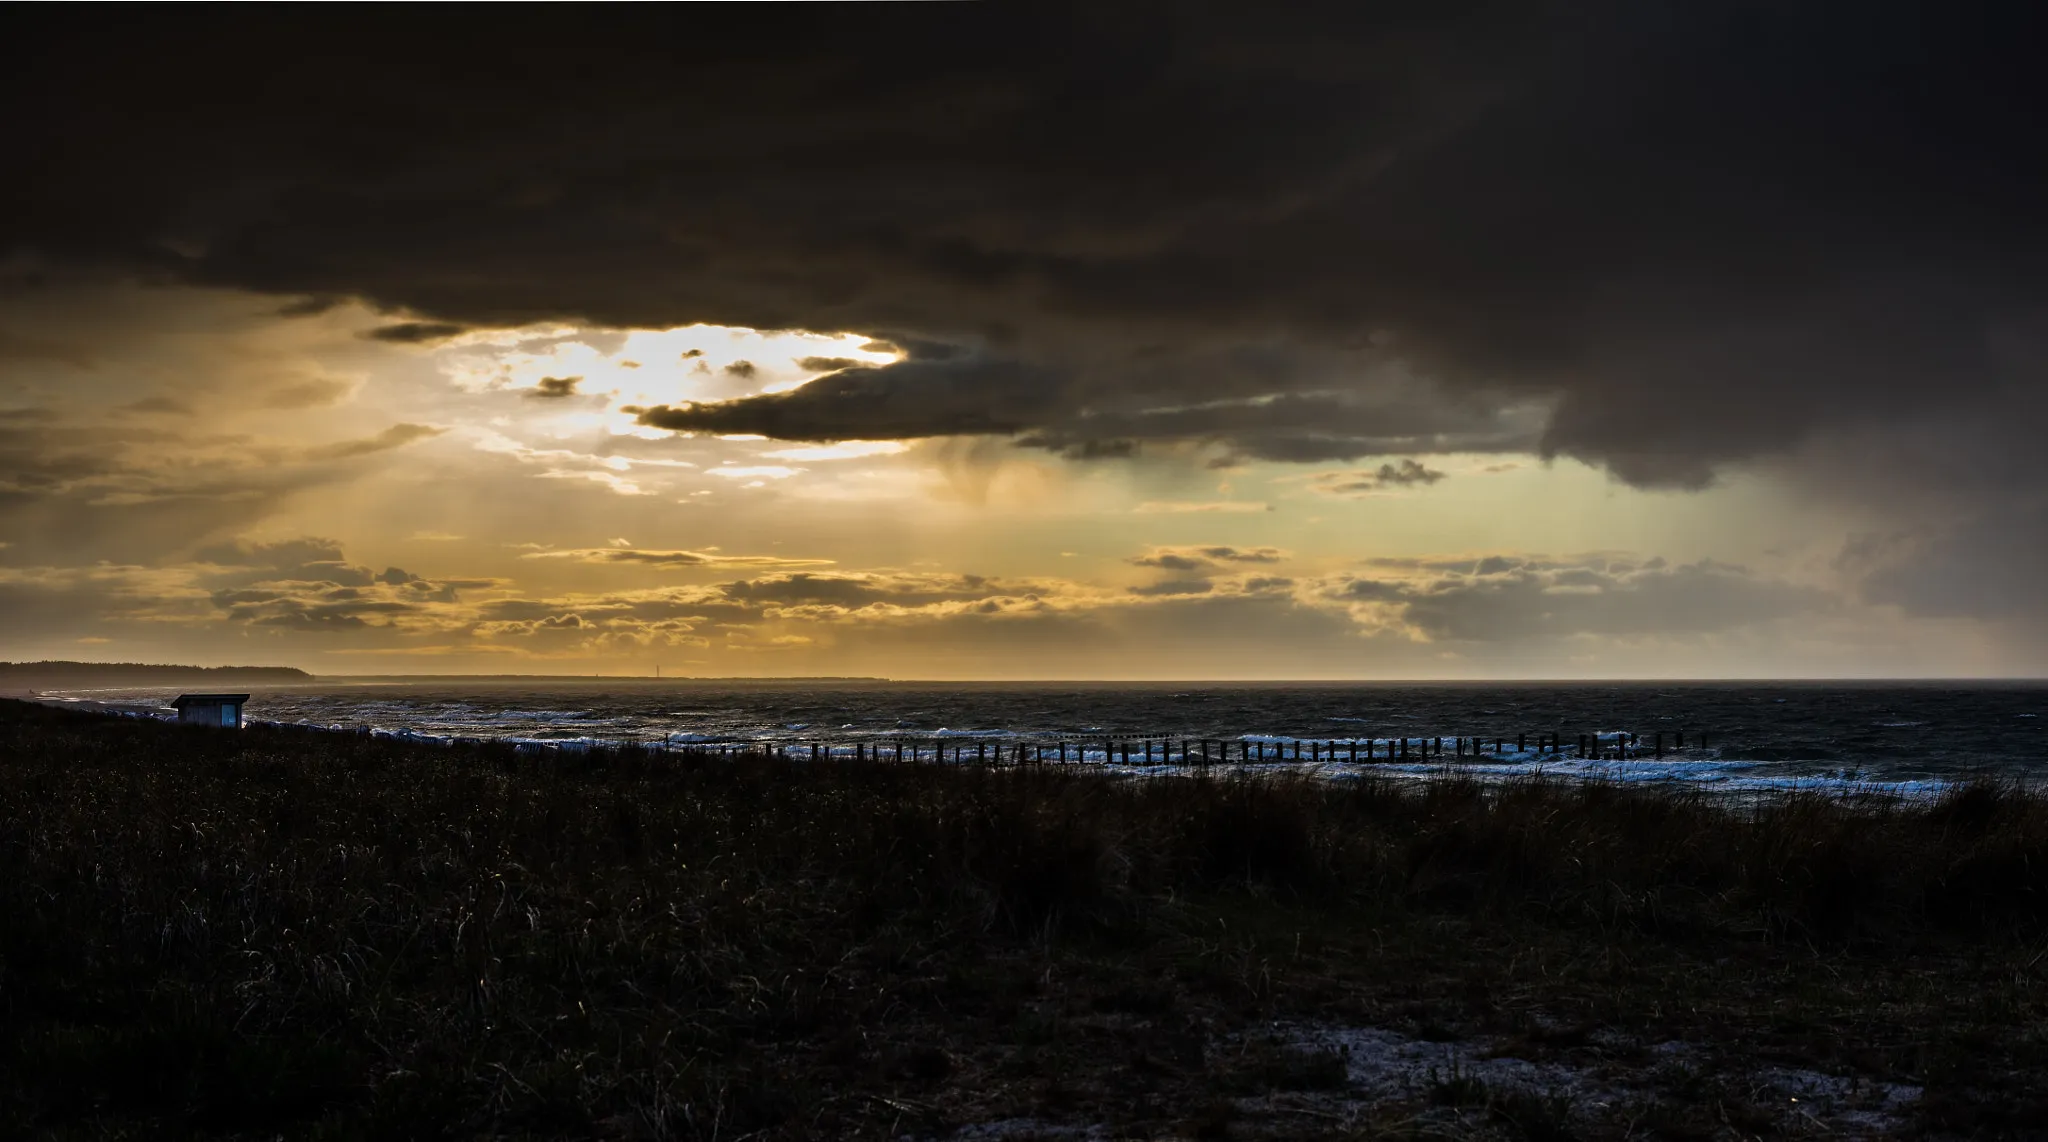 Photo showing: 500px provided description: Scary view to the horizont. [#yellow ,#sky ,#landscape ,#sea ,#sunset ,#water ,#beach ,#clouds ,#waves ,#orange ,#dark ,#germany ,#sundown ,#heaven ,#dramatic ,#scary ,#himmel ,#zingst ,#dar? ,#Landschaft ,#Shot]